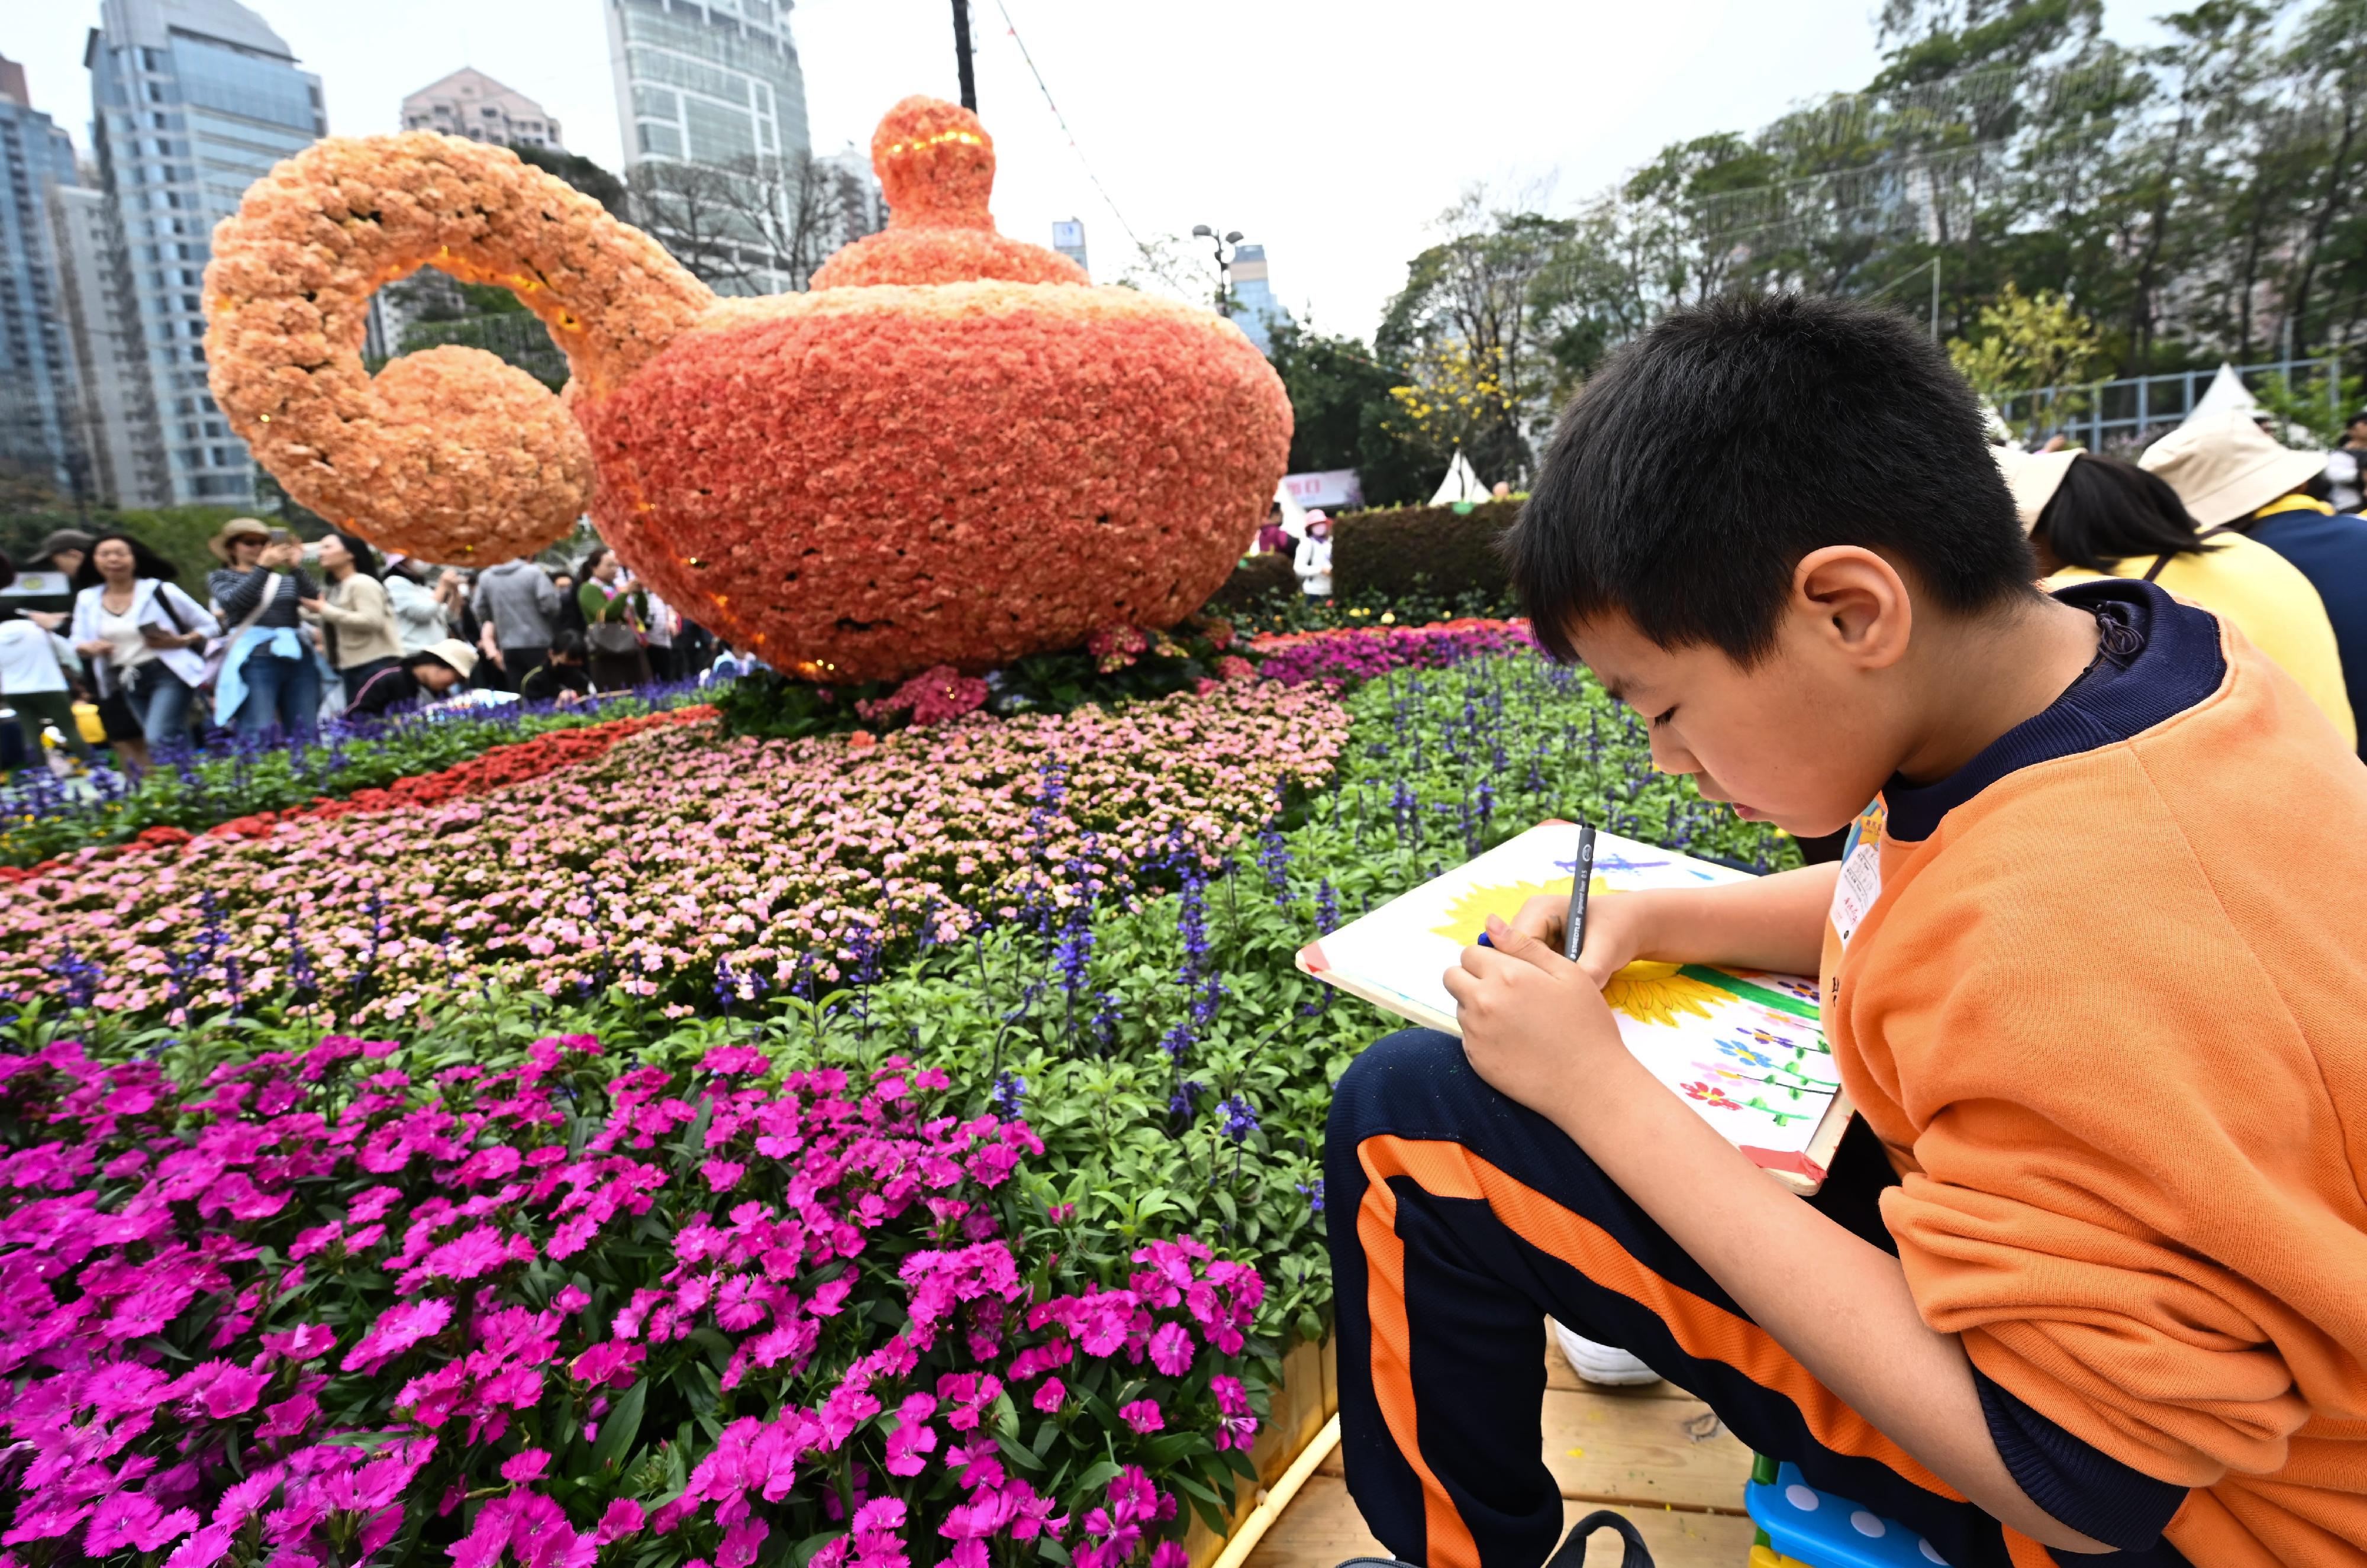 The annual Hong Kong Flower Show extravaganza opened at Victoria Park today (March 15) with some 420 000 flowers on display, including about 40 000 angelonias as the theme flower. The Jockey Club Student Drawing Competition held today attracted about 2 200 participants.